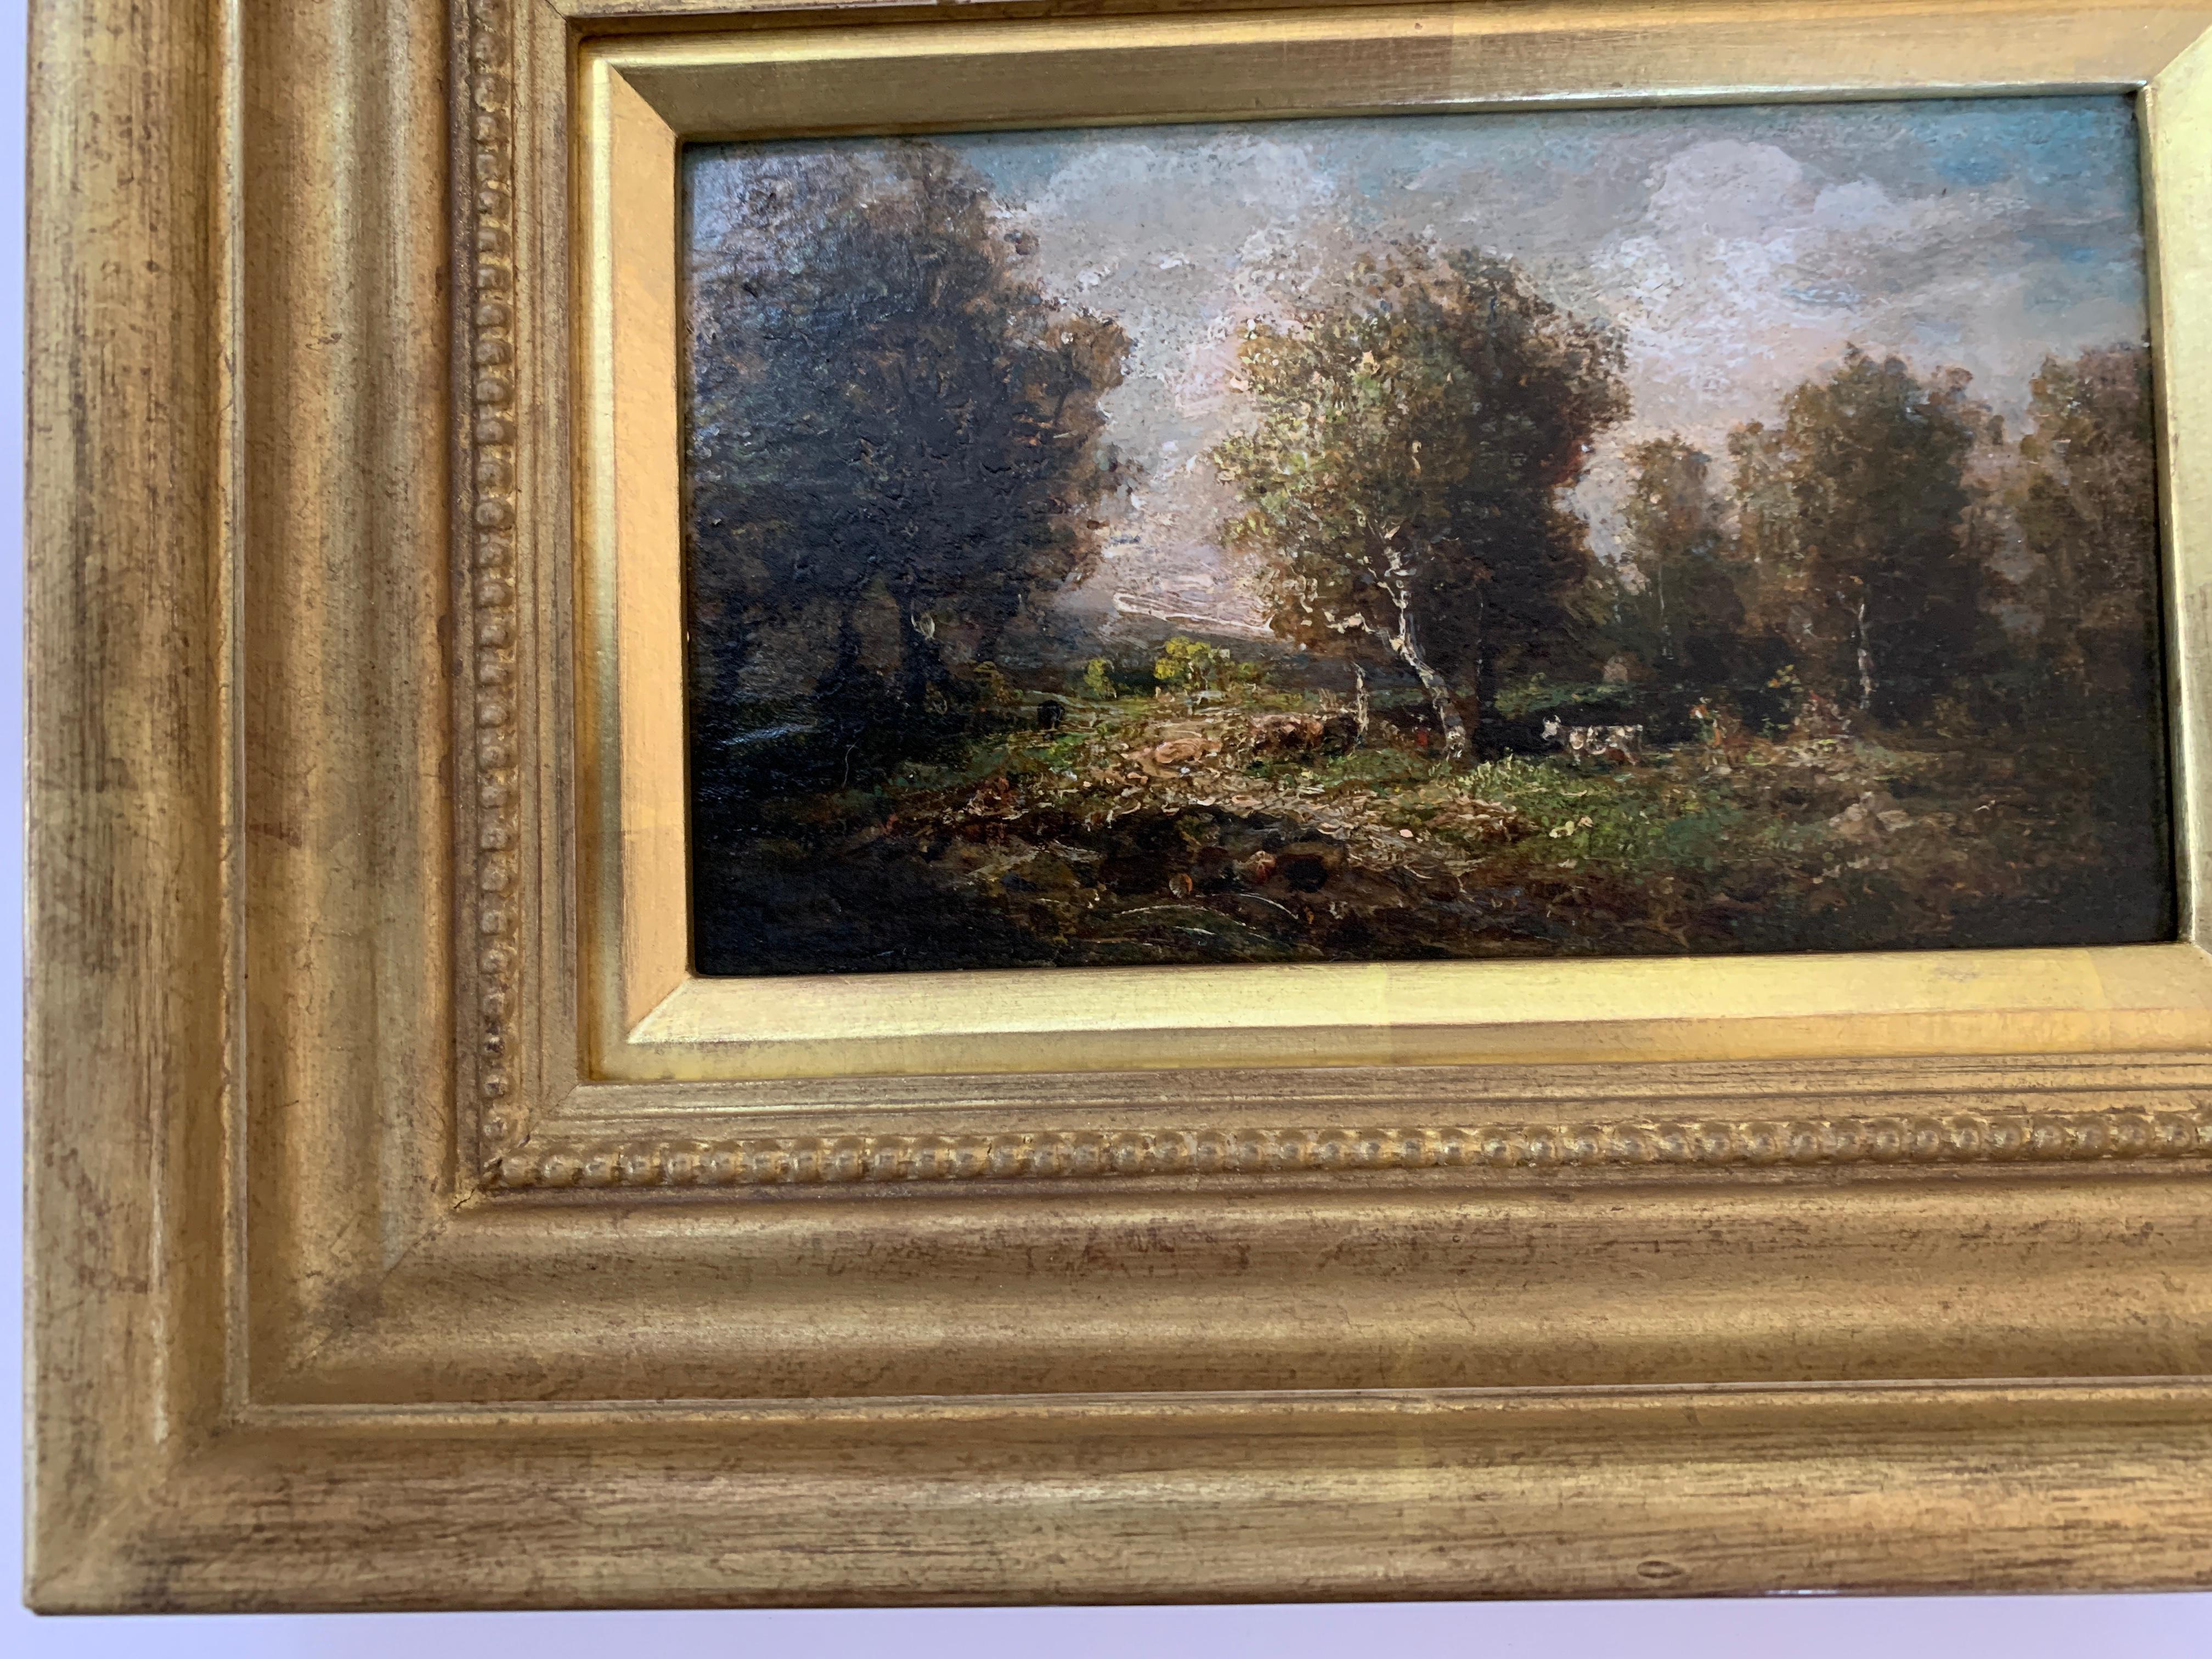 19th century French forest landscape near Barbizon and Fontainebleau - Brown Figurative Painting by Attributed to Narcisse Virgilio Diaz de la Pena